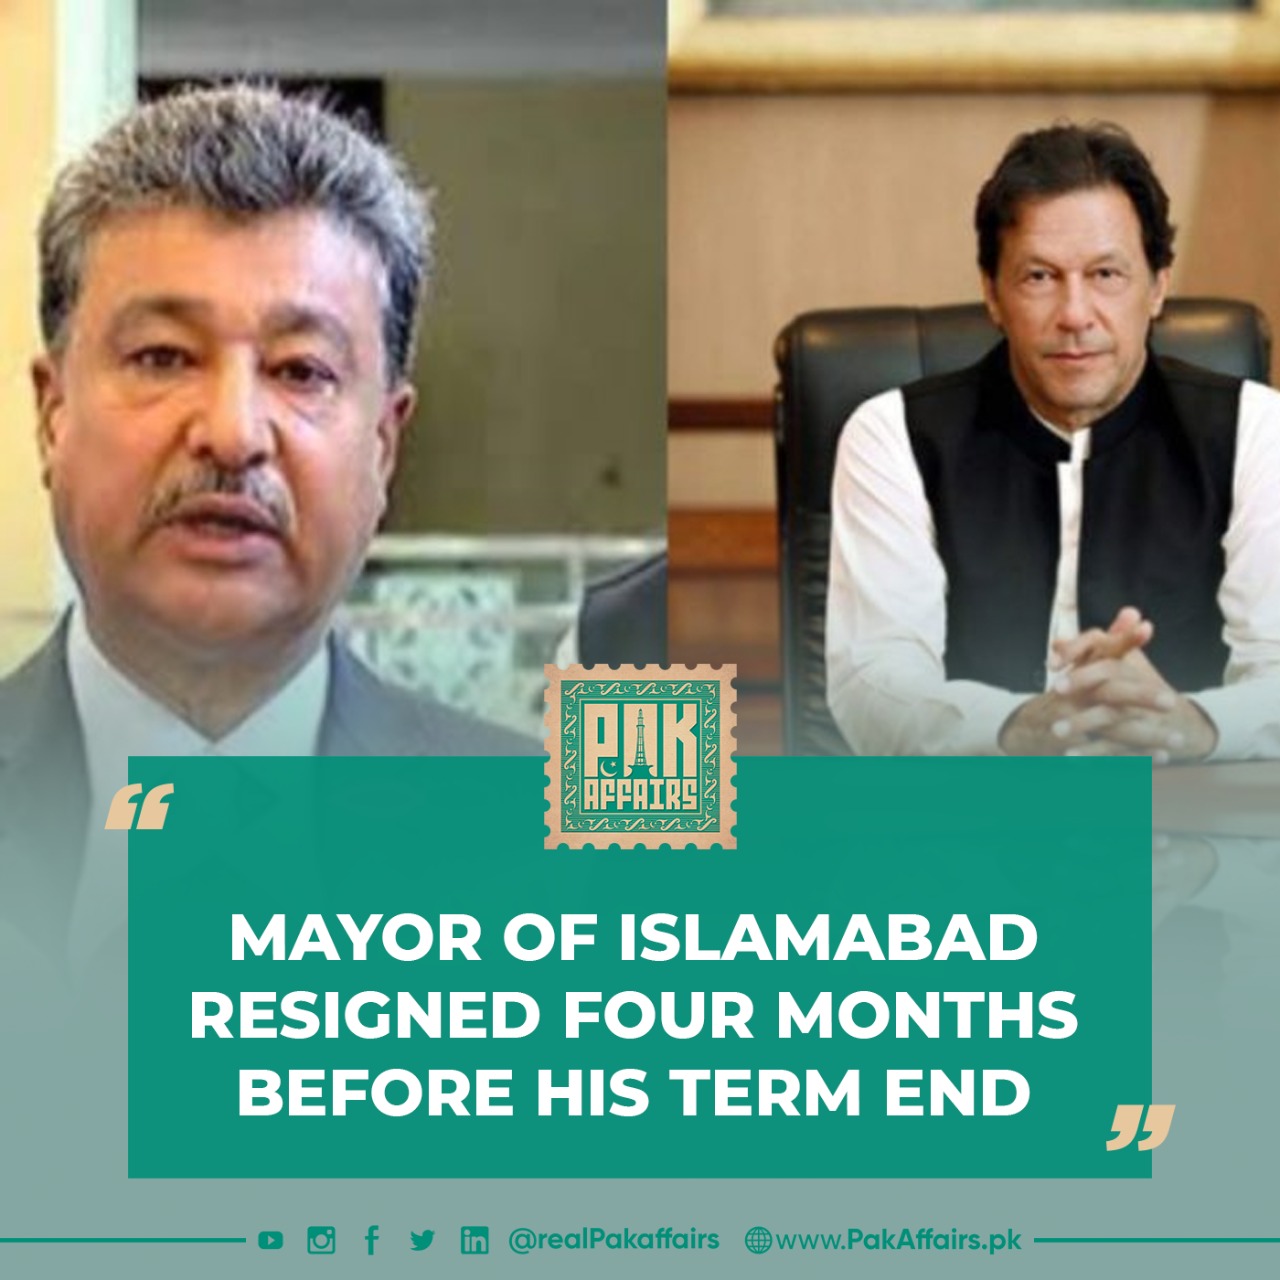 The mayor of Islamabad resigned four months before his term expired